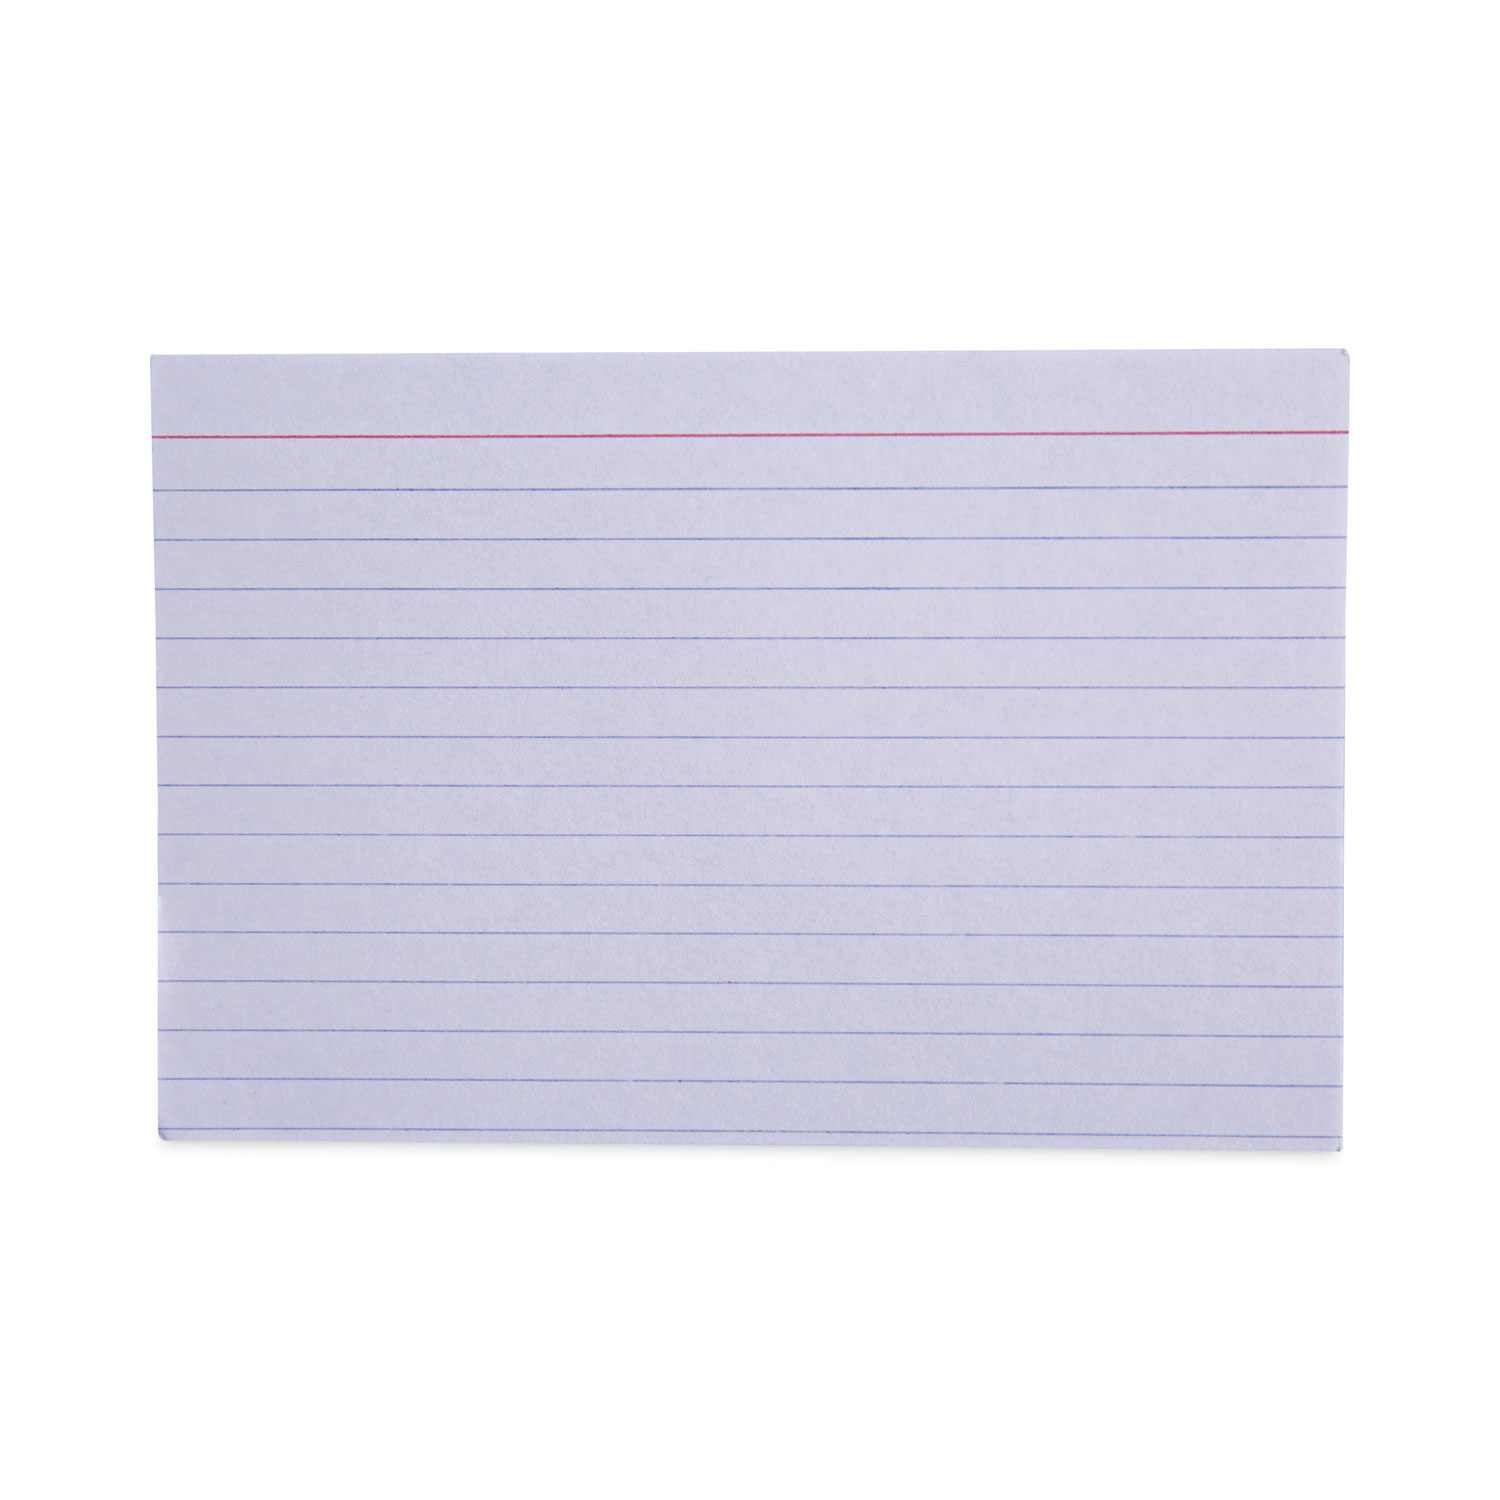 50 Ct Mead Ruled 4x6 Index cards - Wirebound